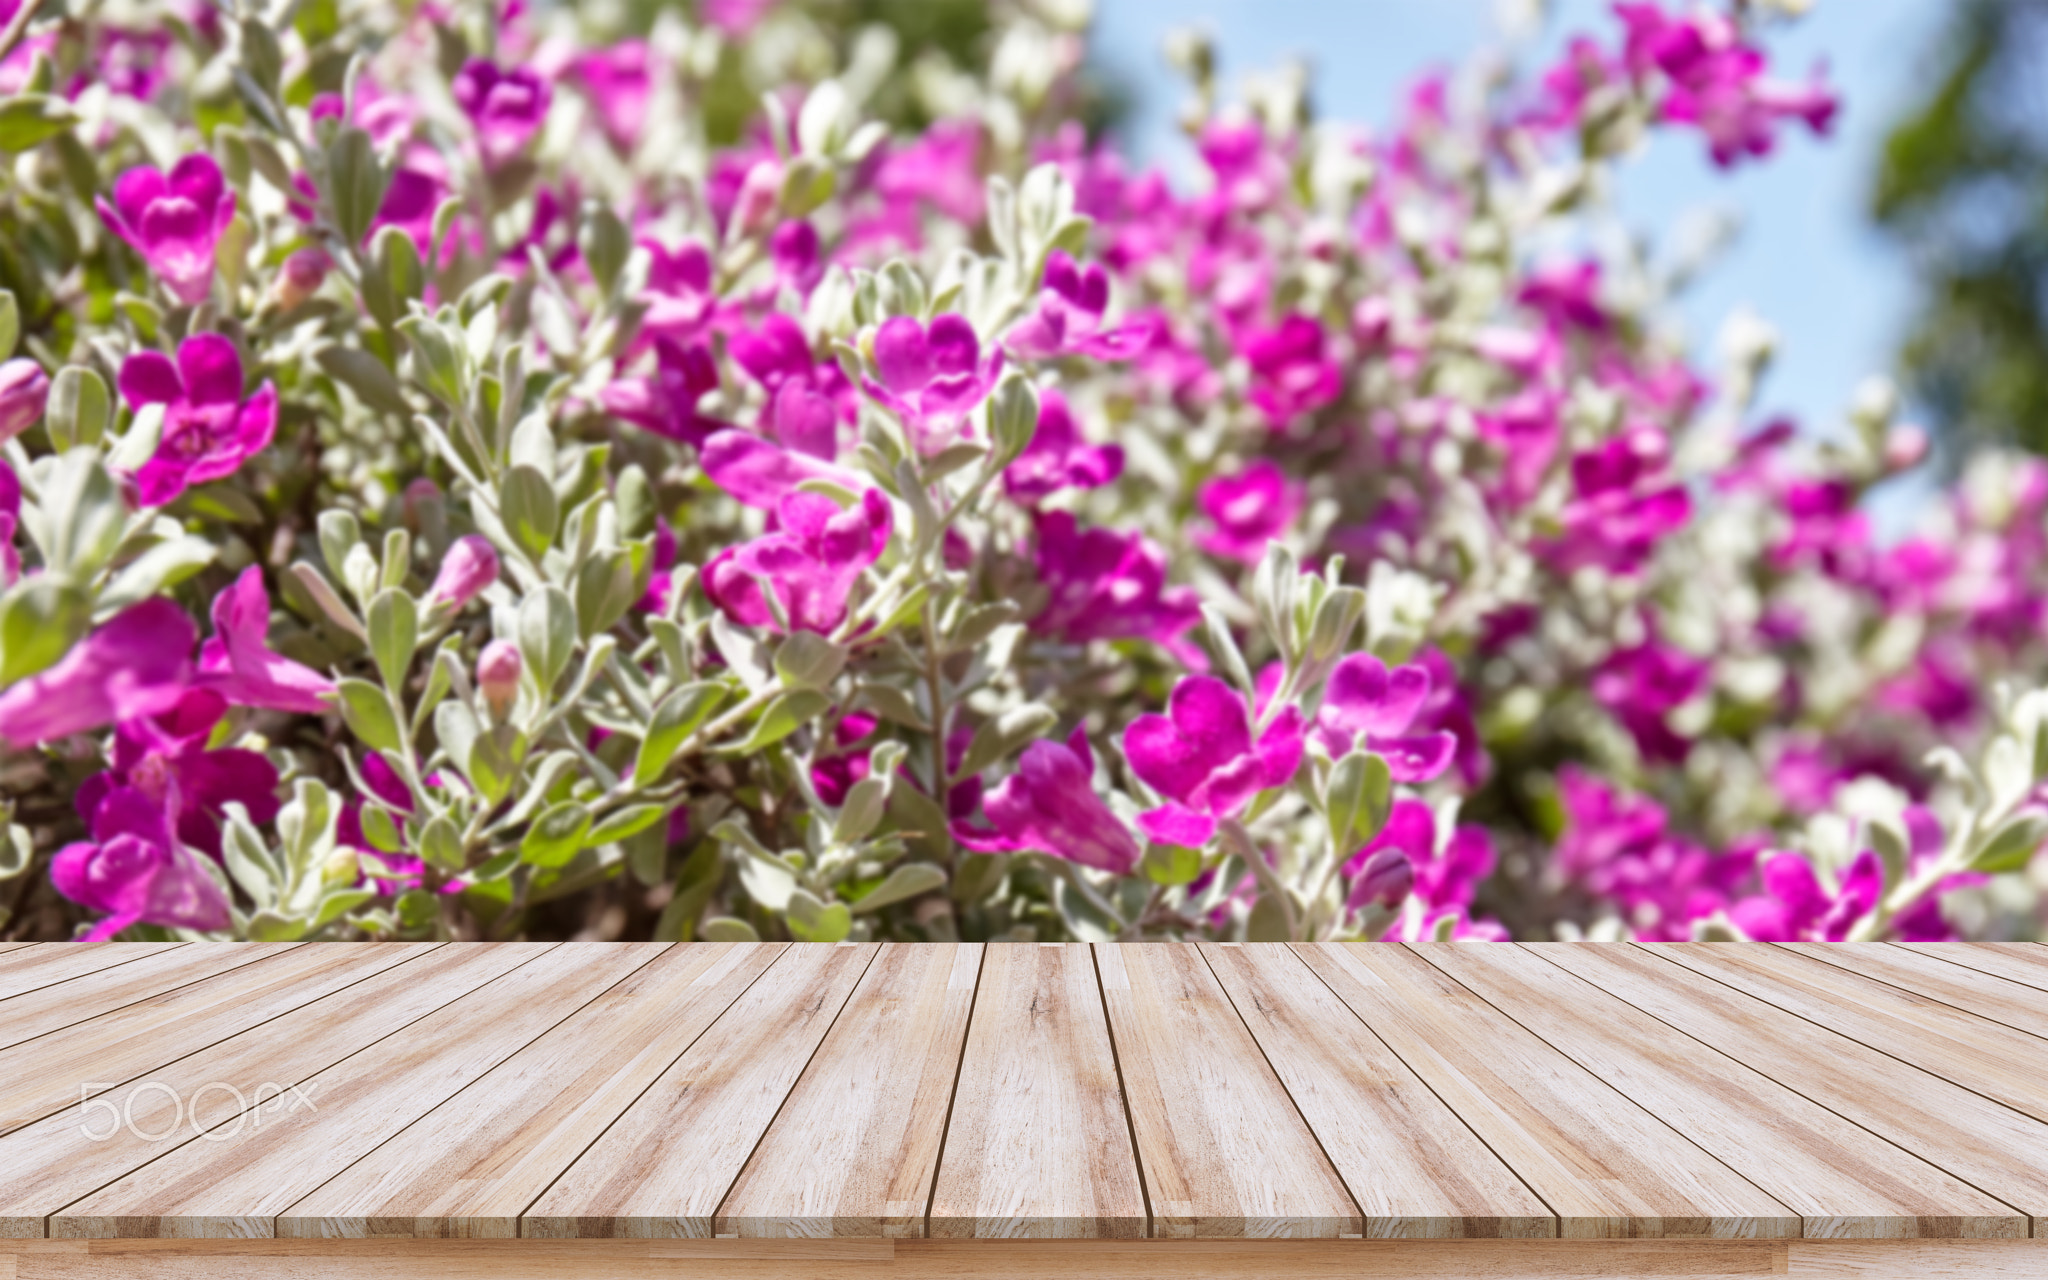 Empty wooden table top with purple flower background, design for montage products display or mock-up